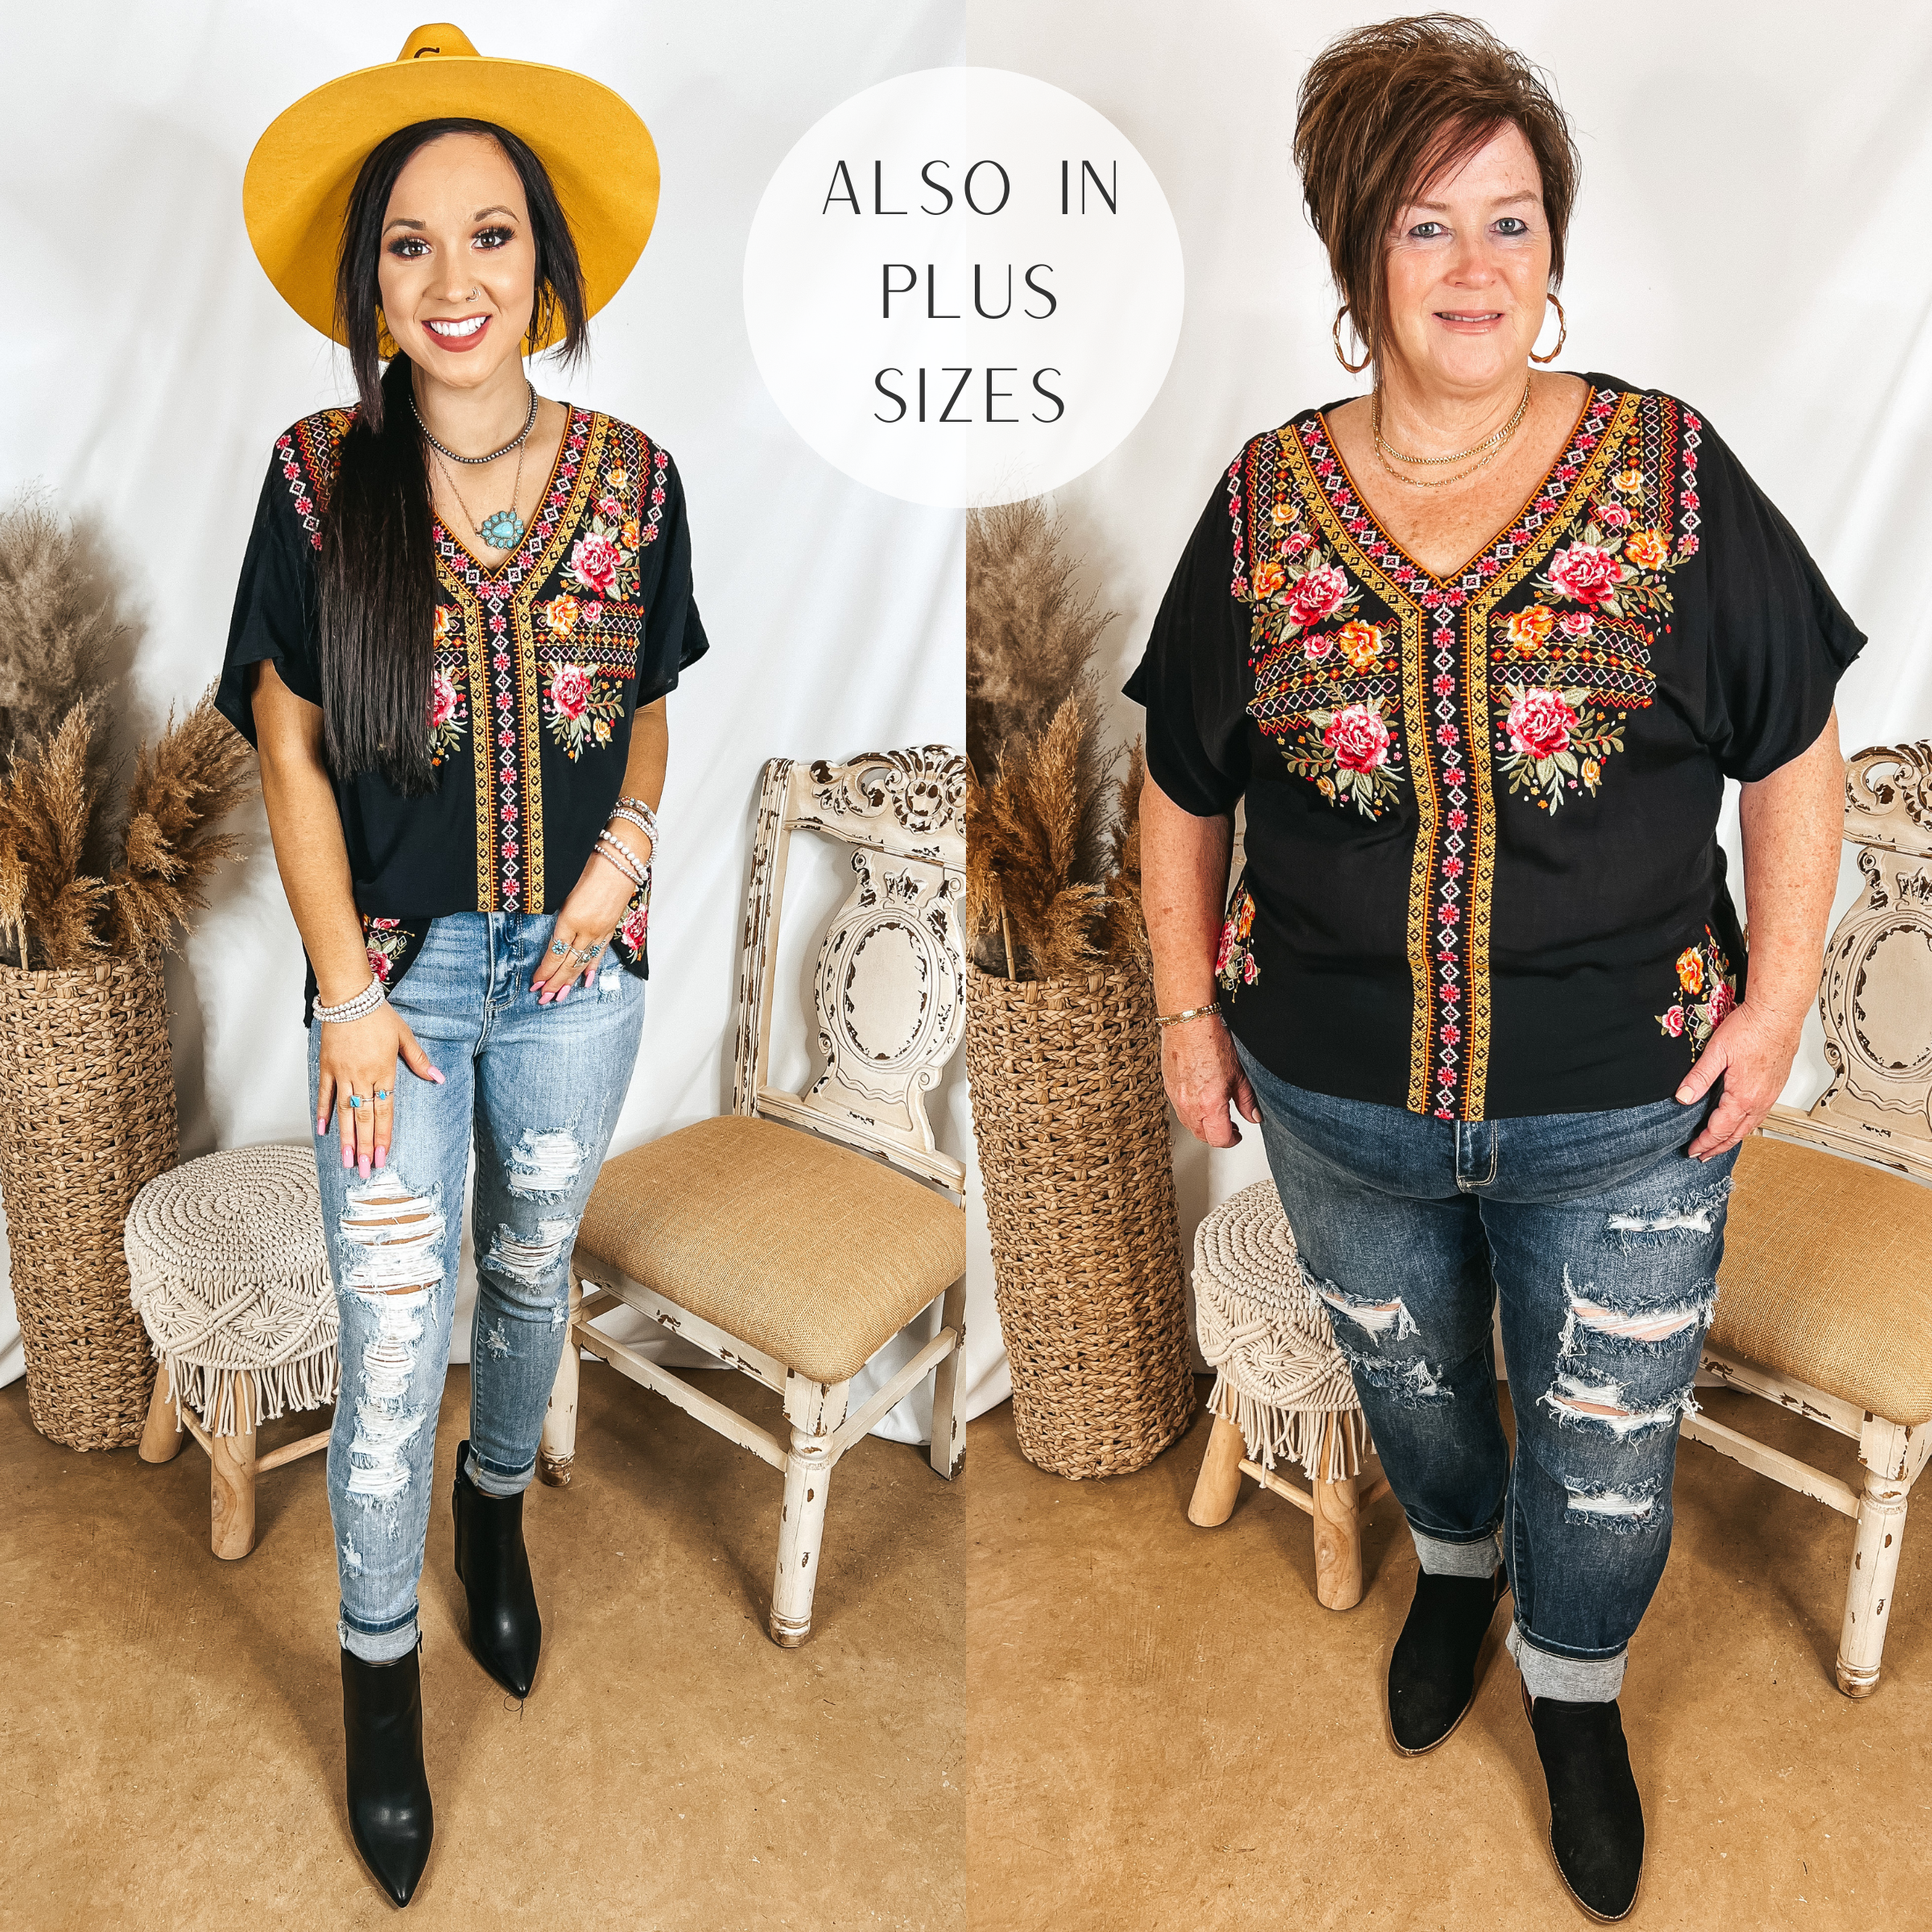 Models are wearing a black embroidered top with a v neckline. Size small model has it paired with distressed skinny jeans, black booties, and a yellow hat. Plus size model has it paired with distressed boyfriend jeans, black booties, and gold jewelry.